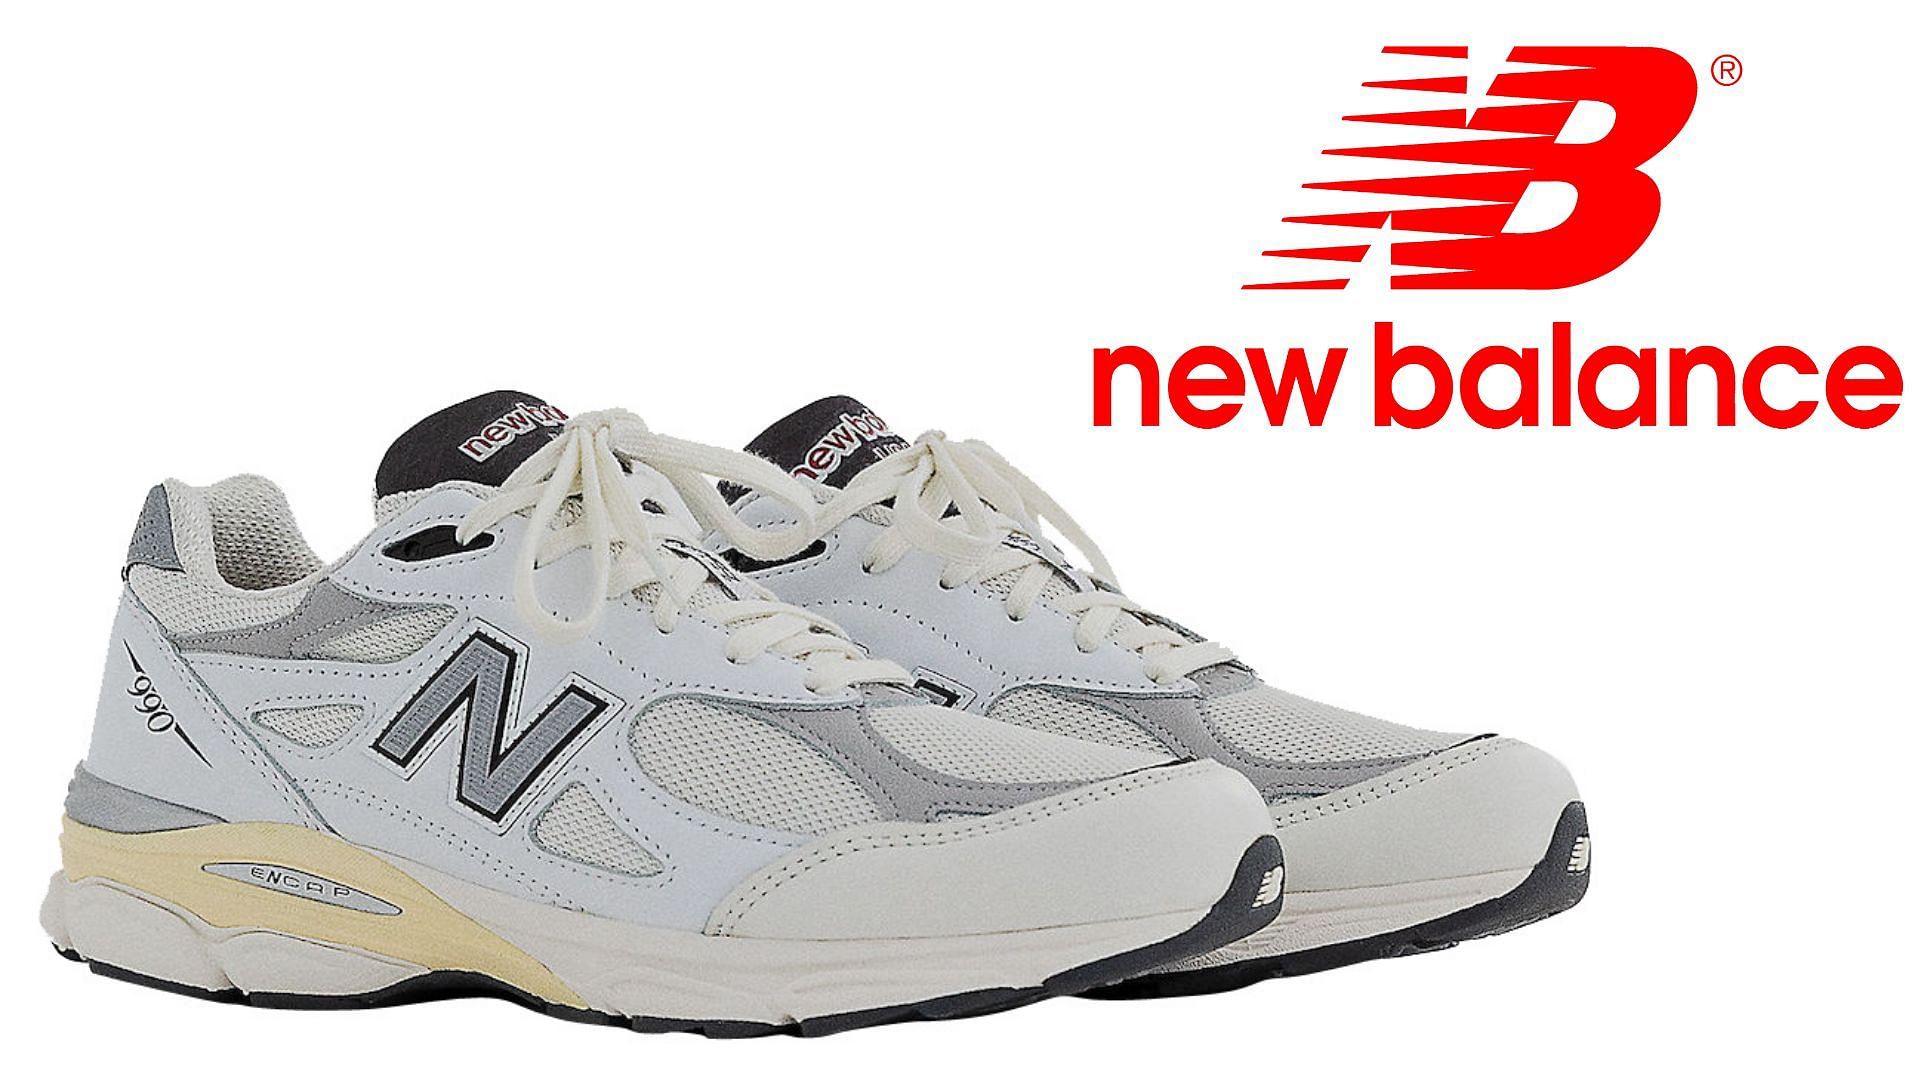 Aime Leon Dore's New Balance 650R: Where to buy, release date 